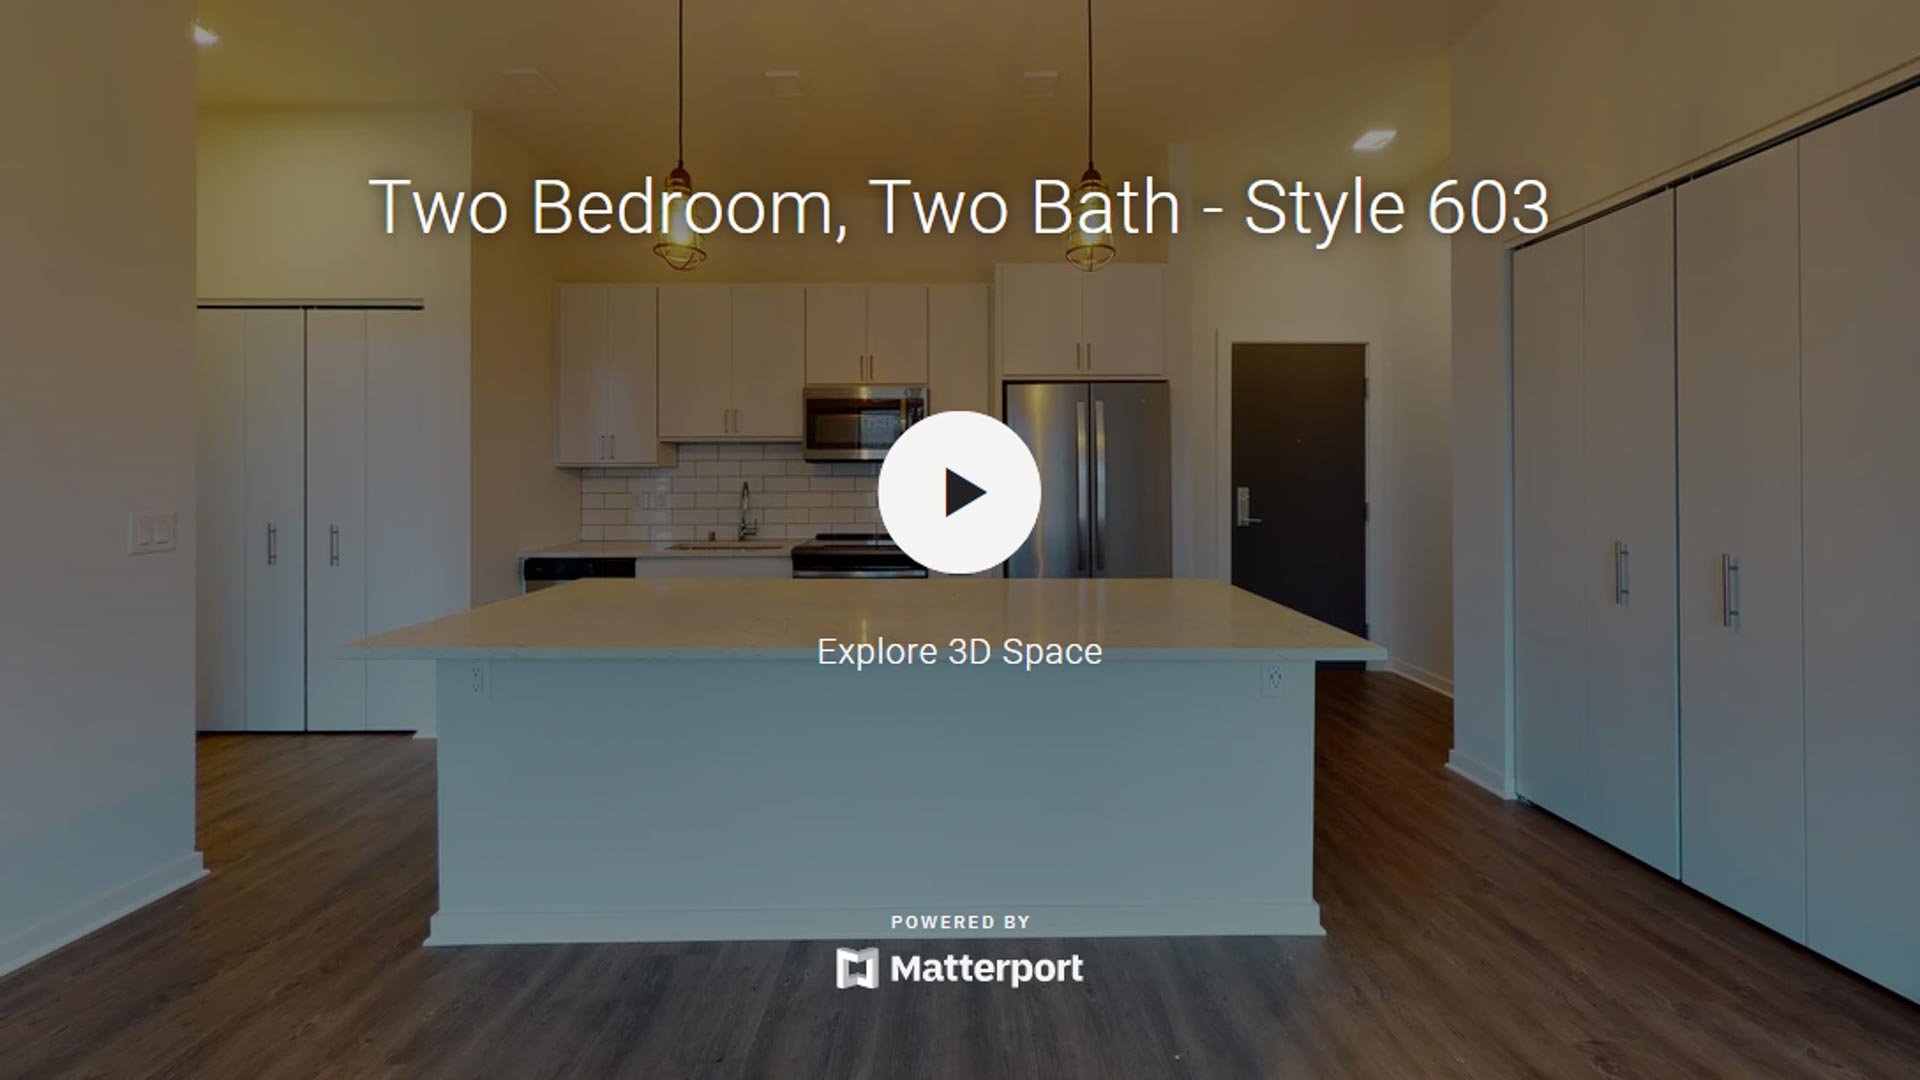 Two Bedroom, Two Bath - Style 603